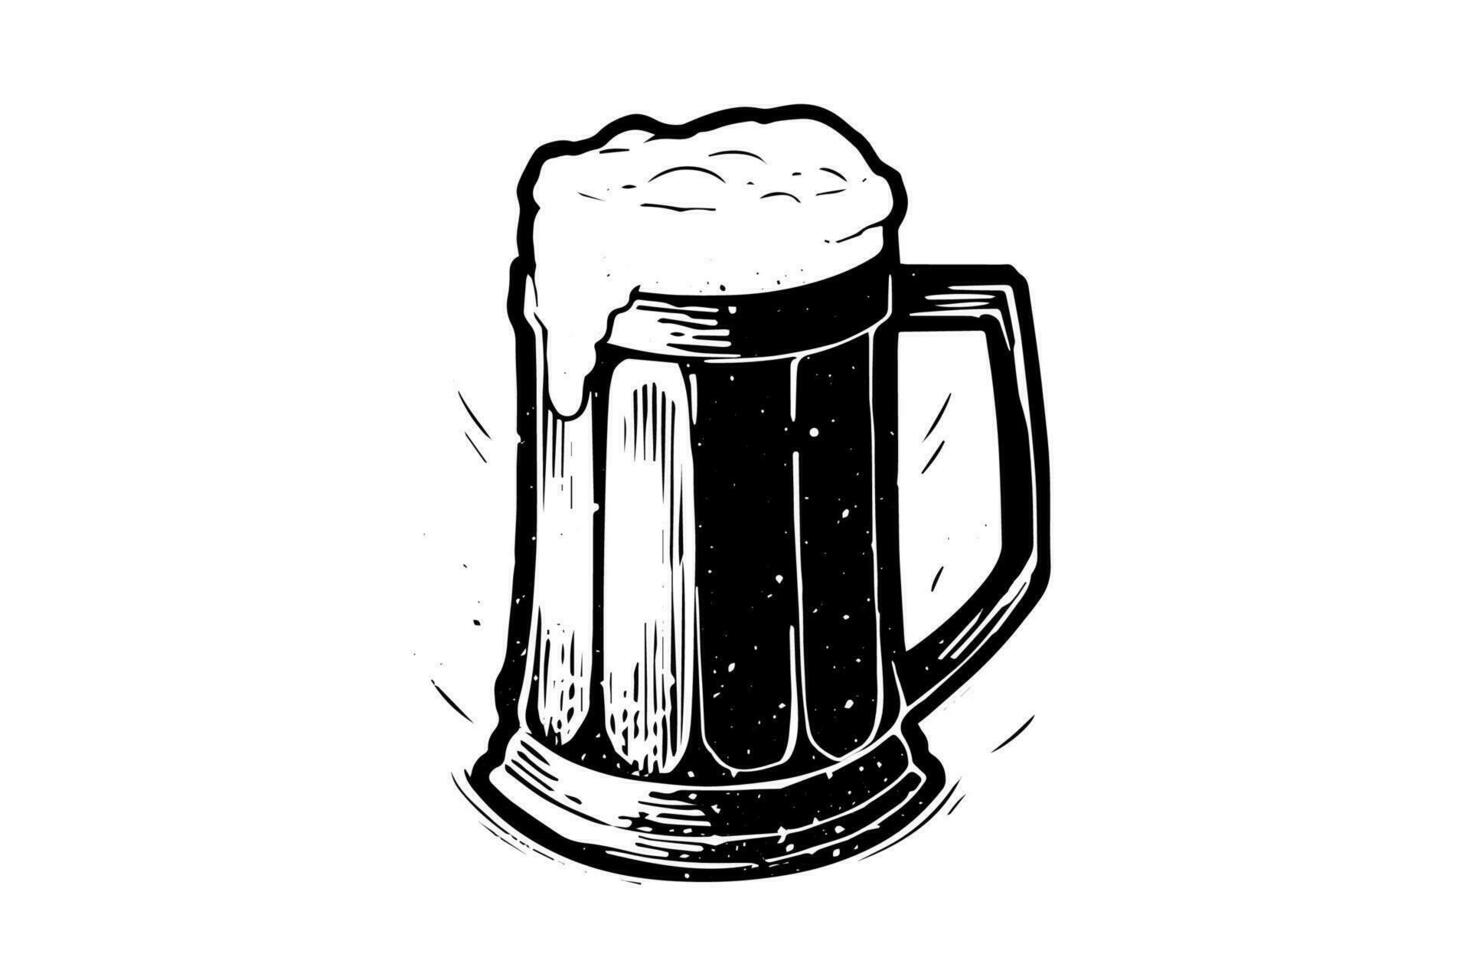 Beer glass with ale and lush foam.hand drawn ink sketch. Engraving vintage style vector illustration.